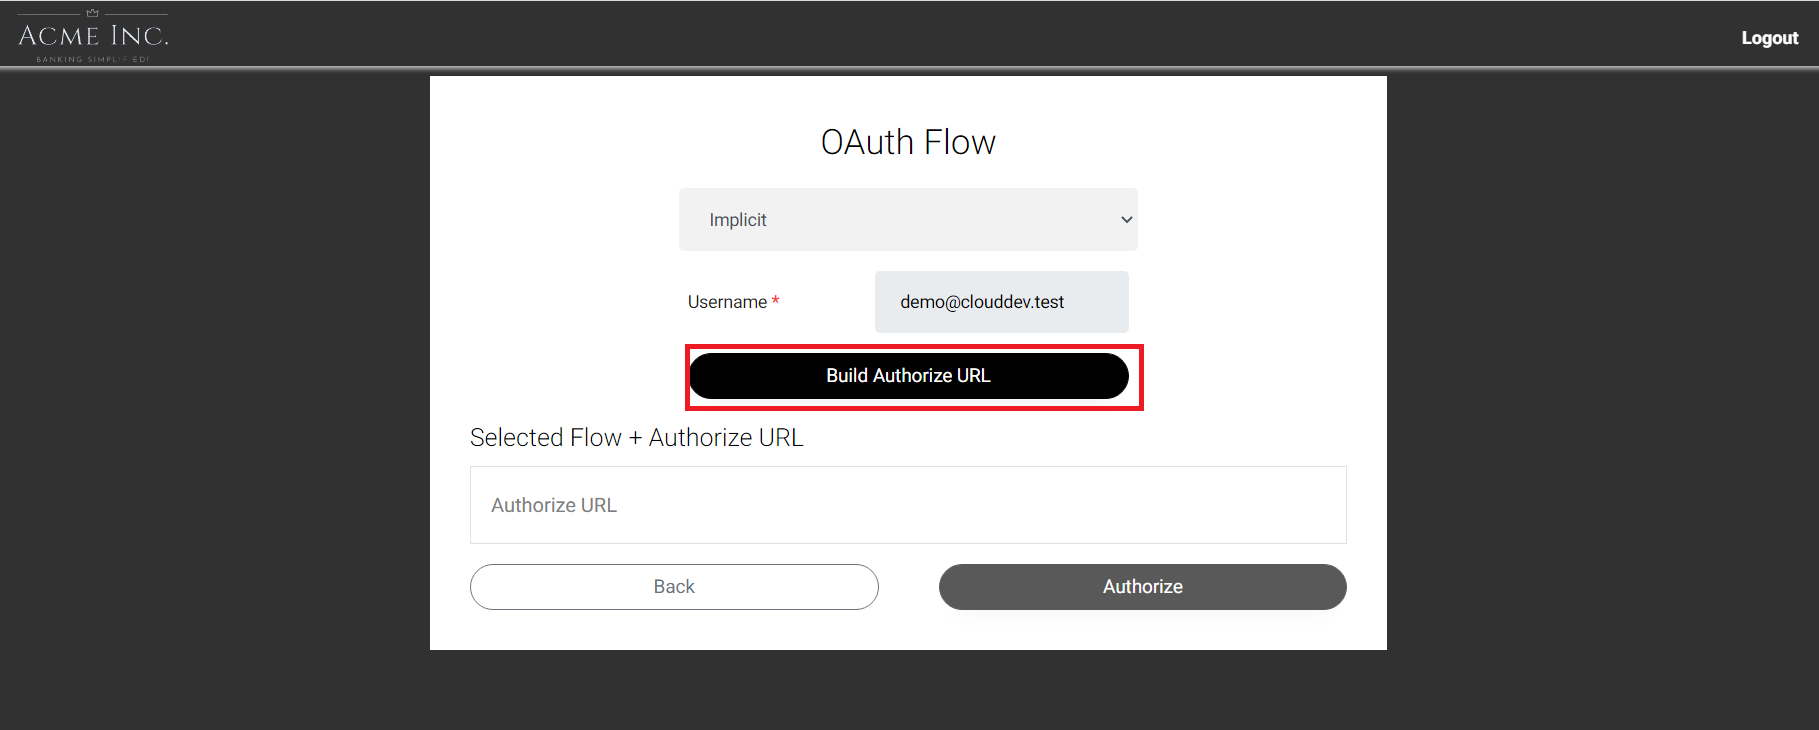 Implicit flow for OAuth - User Interactive protocol